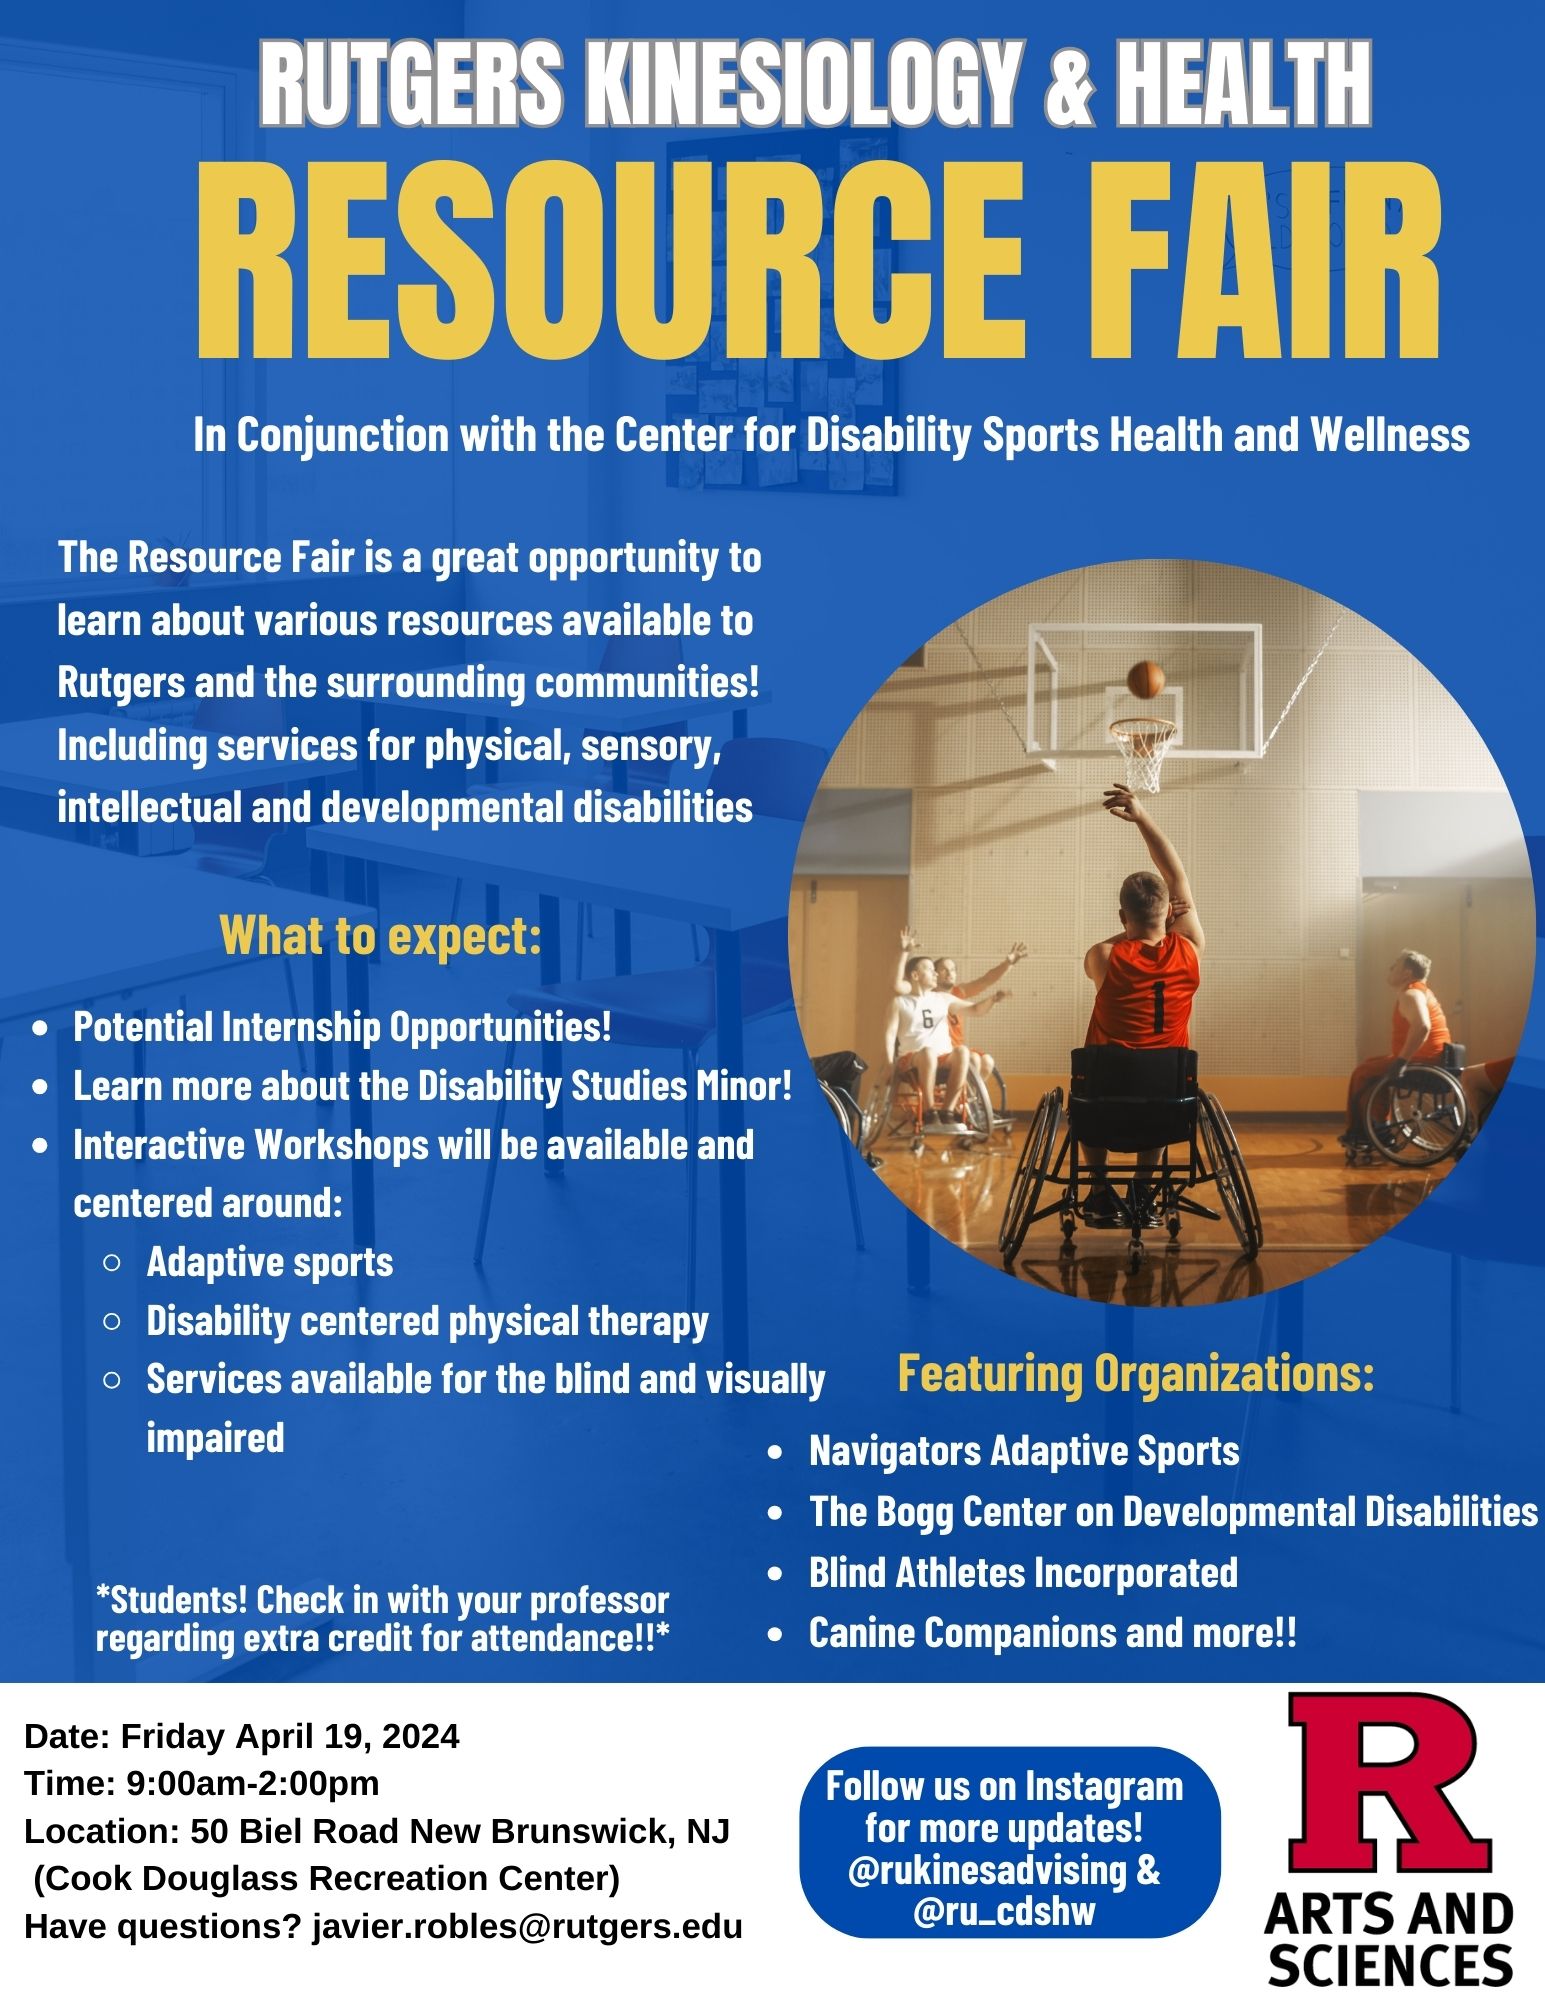 A flyer announcing The Rutgers Kinesiology & Health Resource Fair happening April 19th showcasing resources, internships, and workshops.